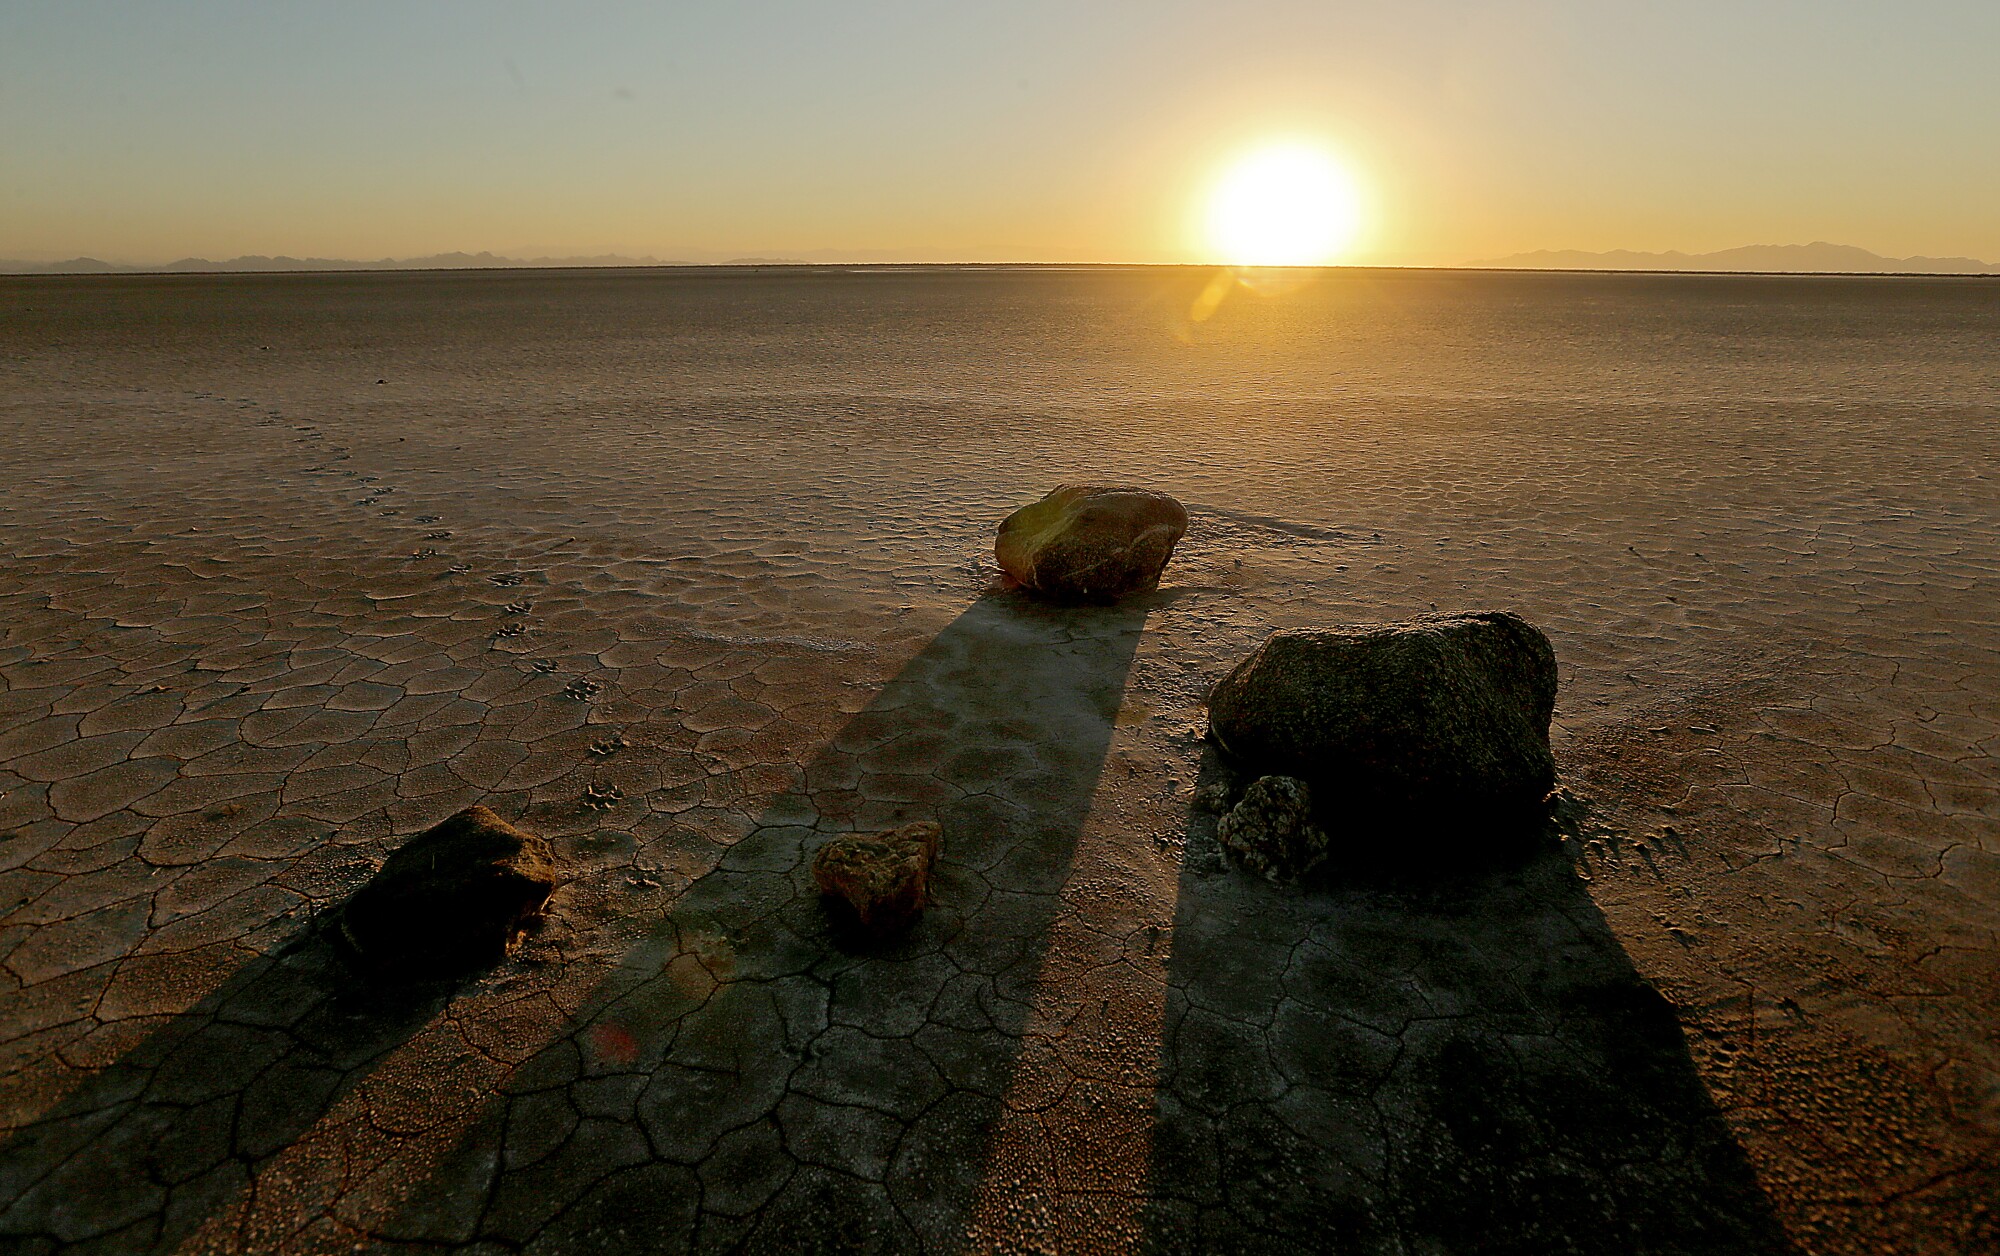 Stones cast long shadows across a dry salt marsh at the southern end of the Colorado River Delta in Mexico.